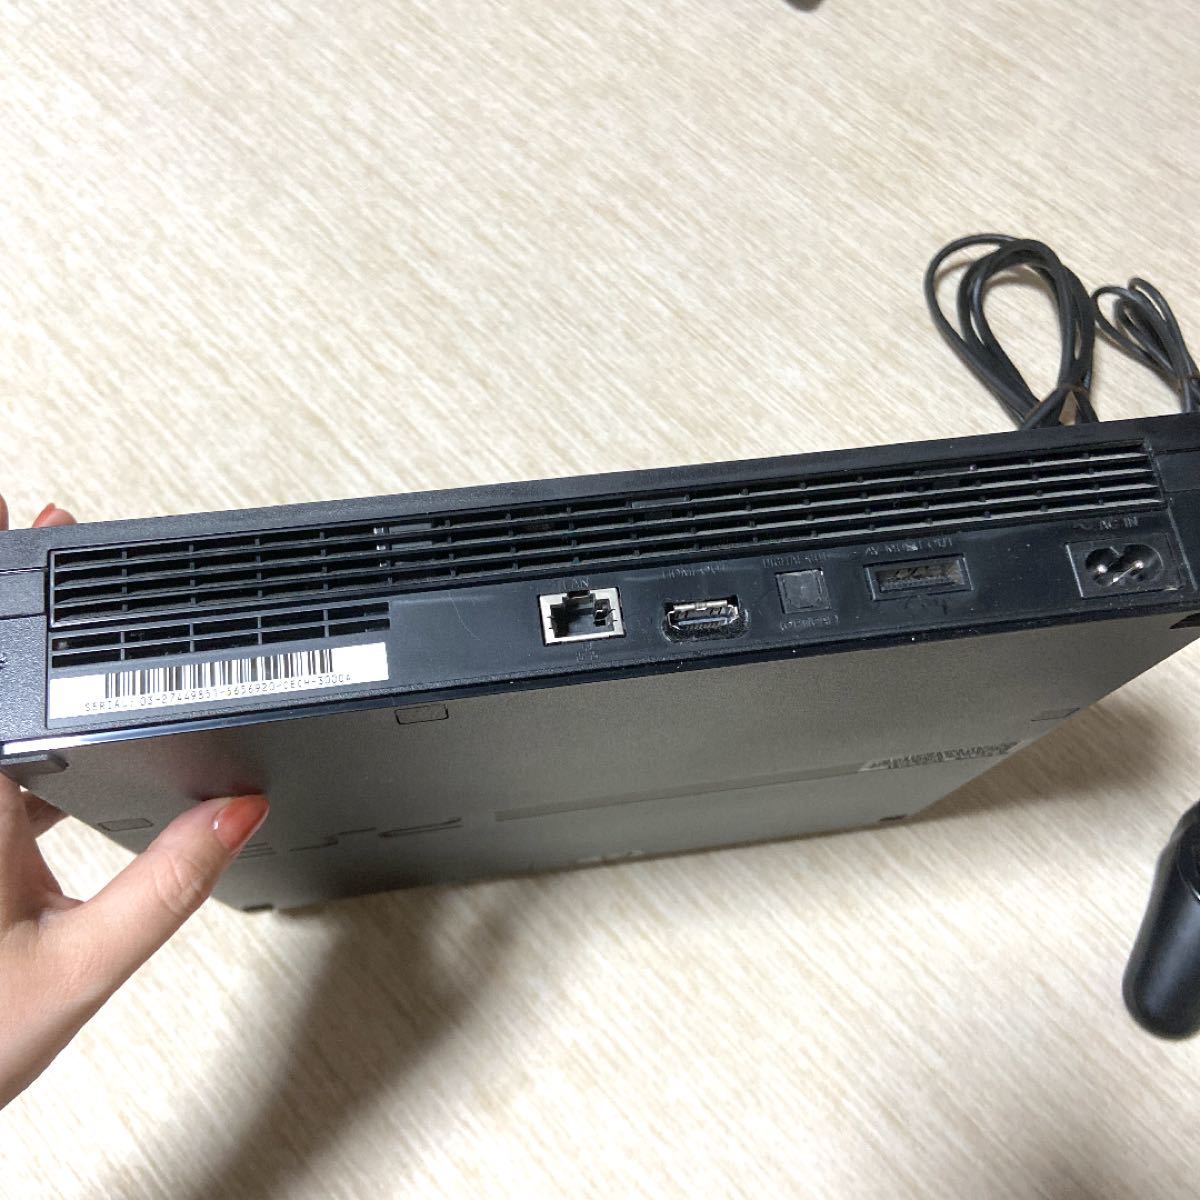 SONY PlayStation3 CECH-3000A PS3 中古 訳あり